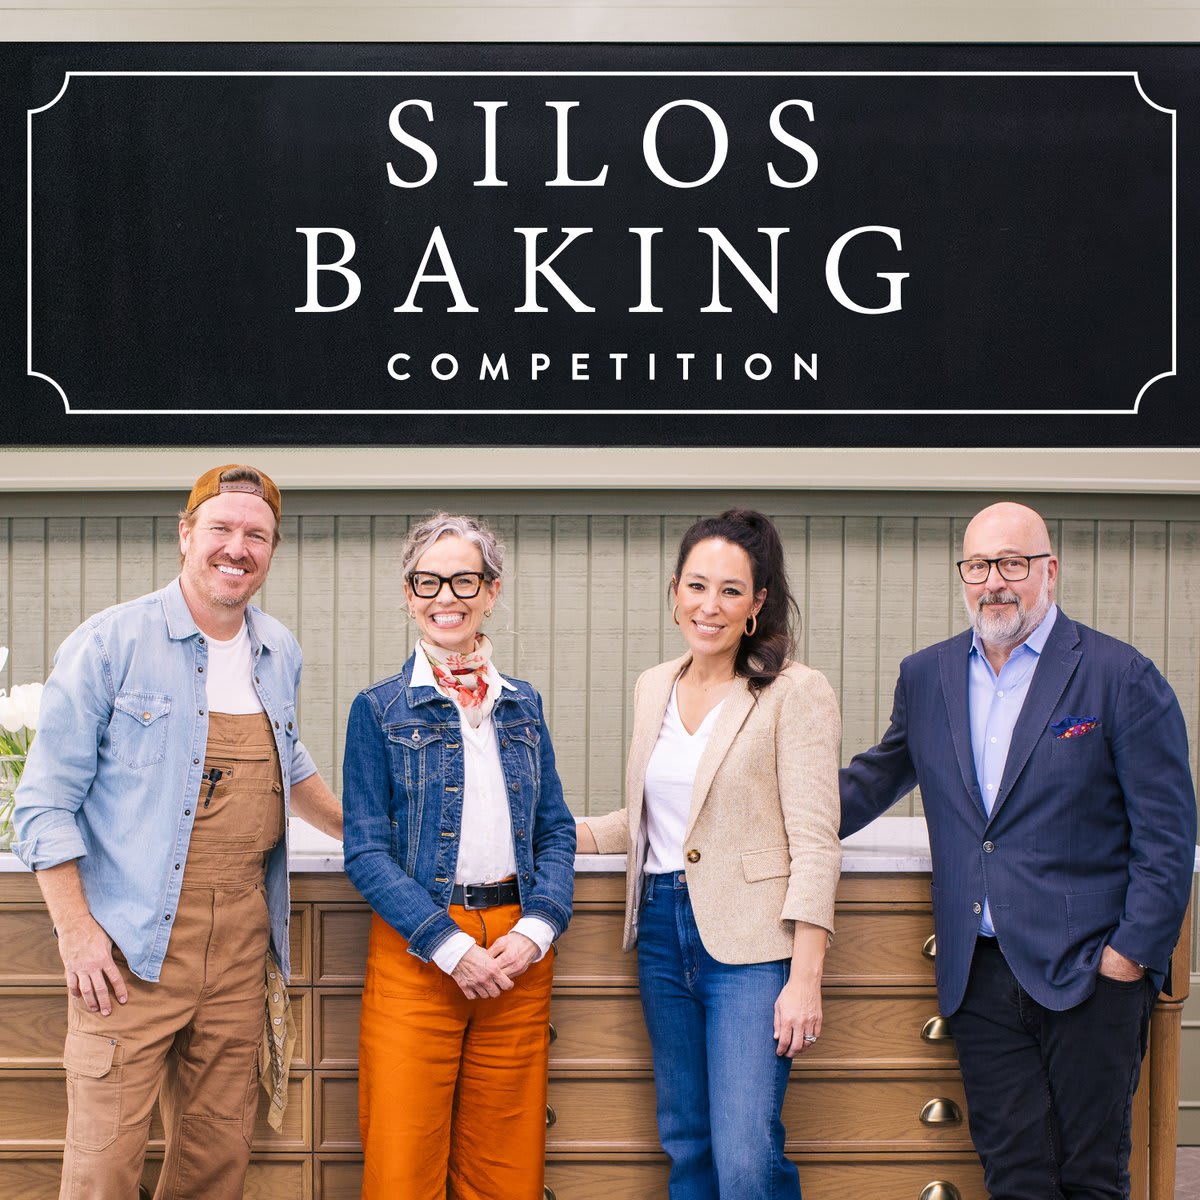 Stay tuned for the first-ever SilosBakingCompetition, coming up NEXT @ 8|7c! 🔥 Six bakers from across the country will go head-to-head in Waco, Texas to impress @chipgaines + @joannagaines for a chance to take home $25k and showcase their treat at @Magnolia's Silos Baking Co.